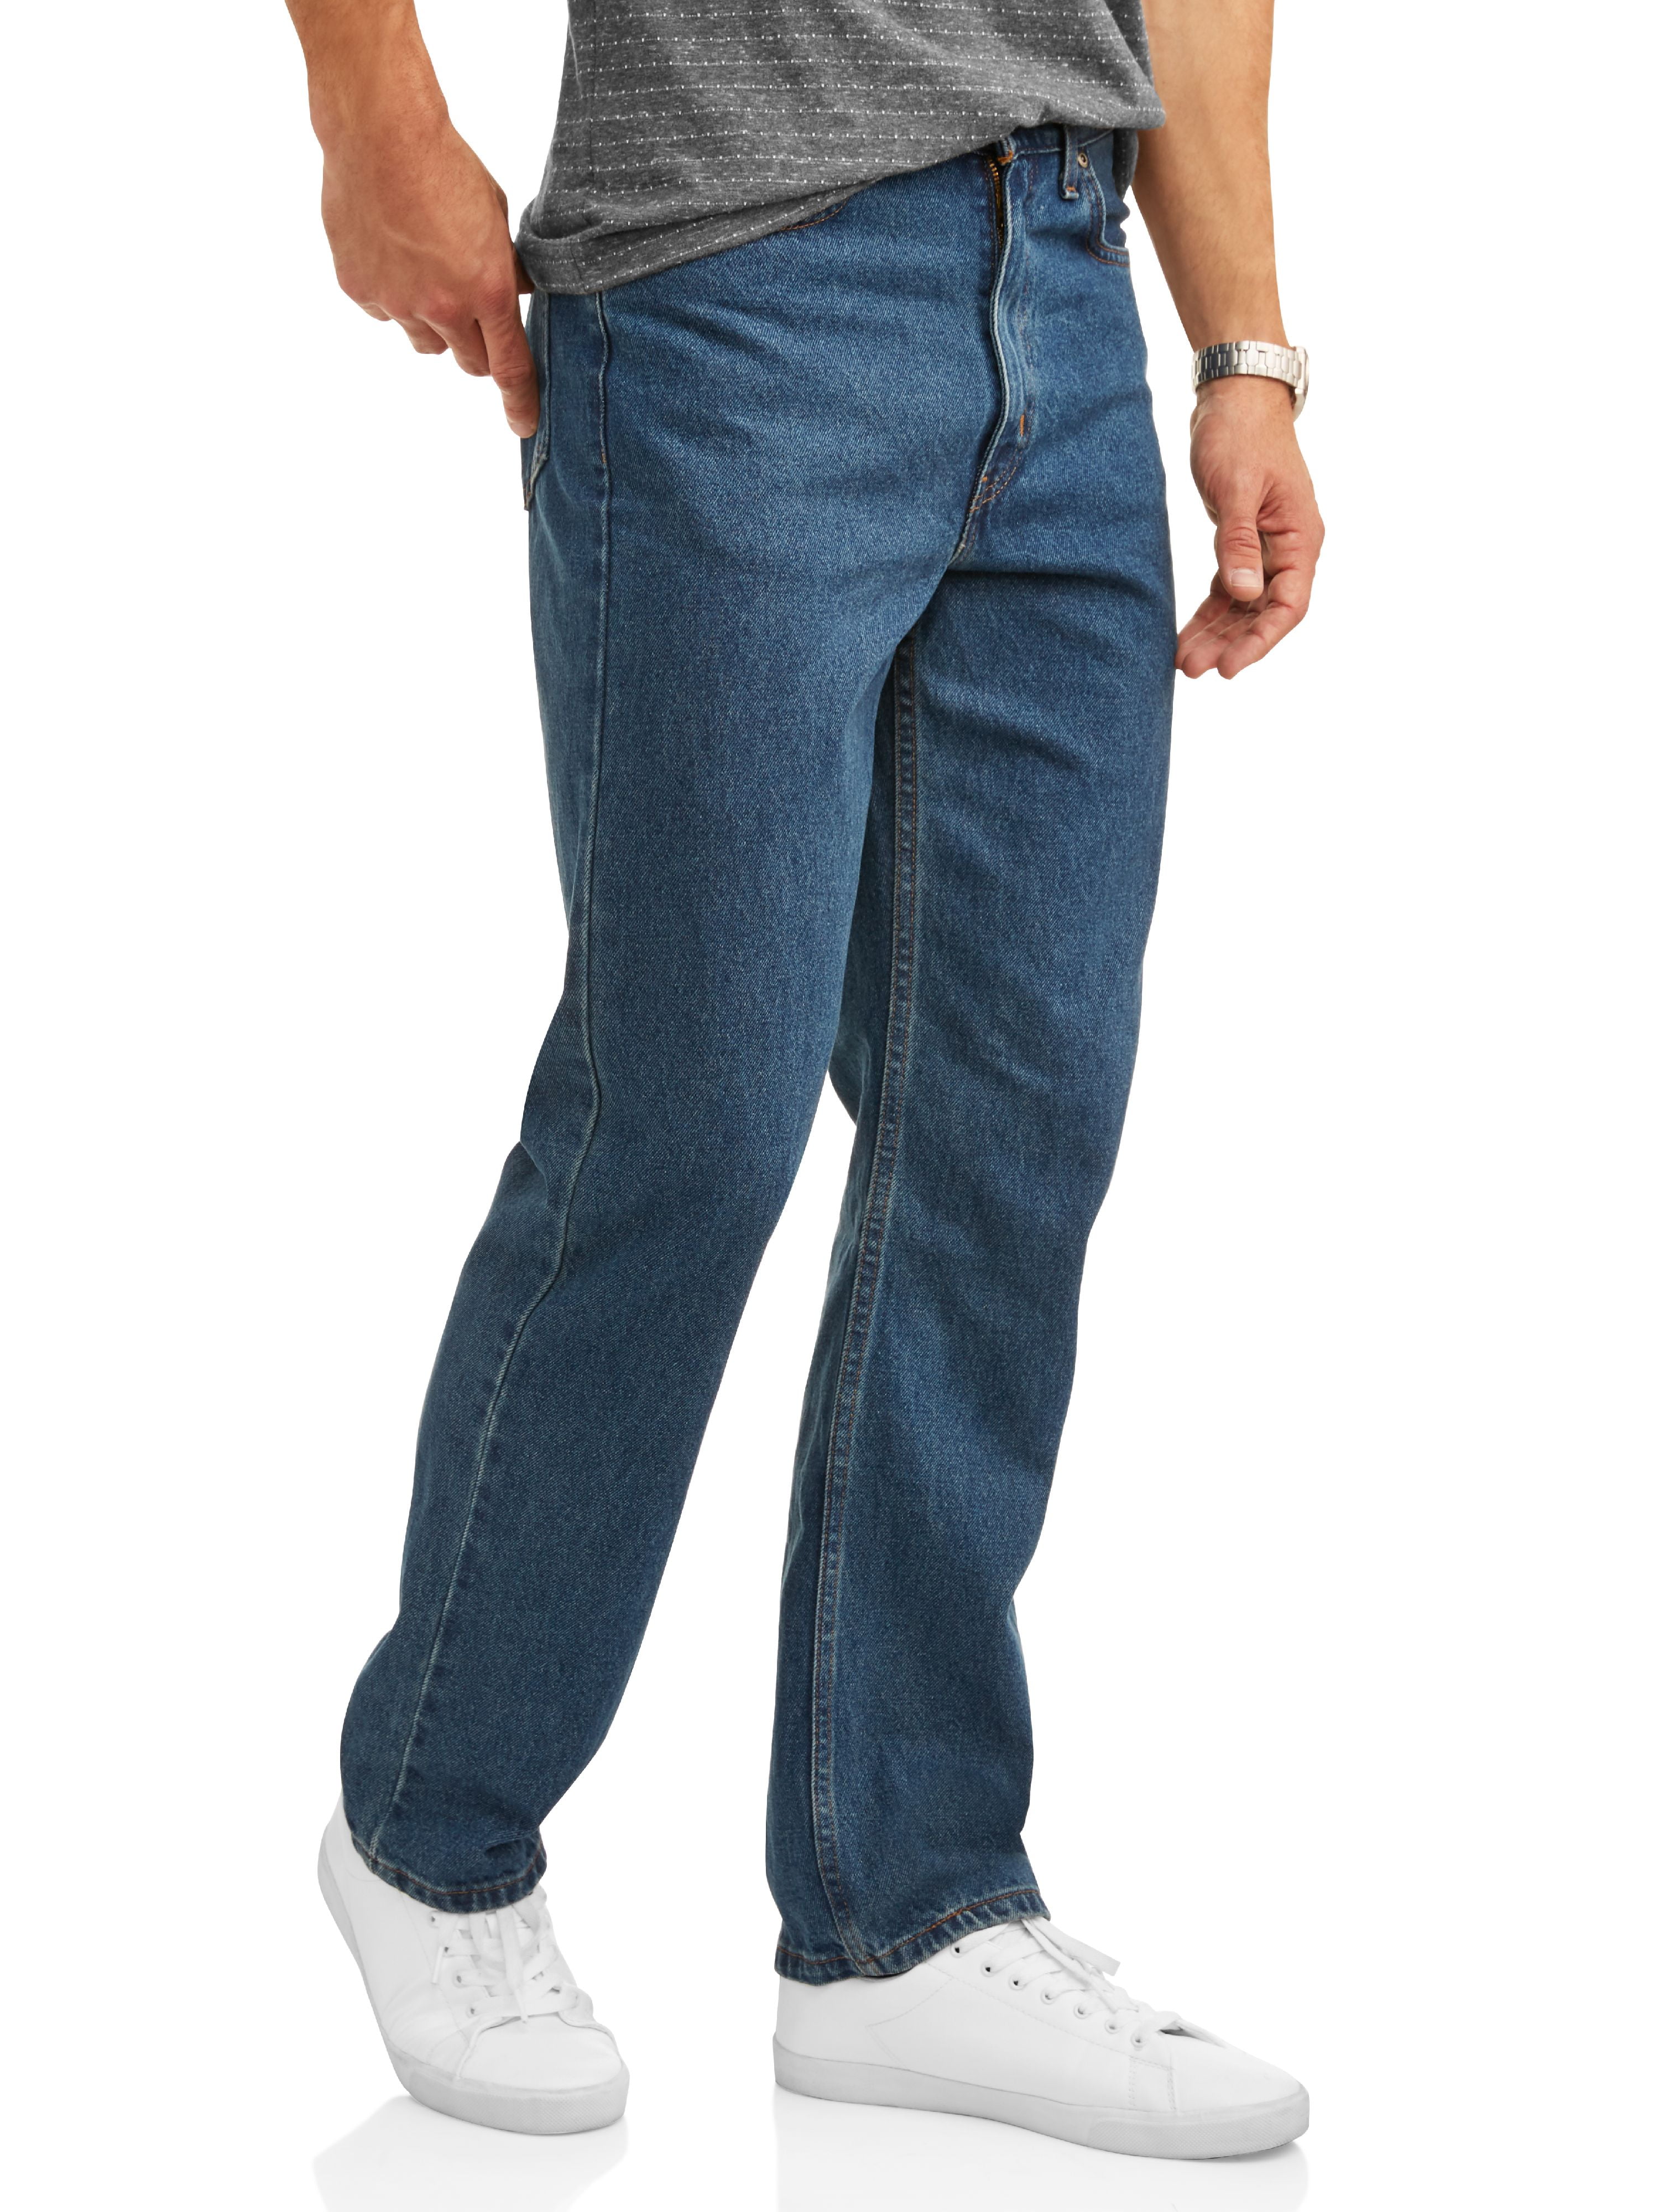 Mens Jeans Relaxed Fit Pants Baggy Casual Simple Big & Tall Plus Size  30-46W 32L